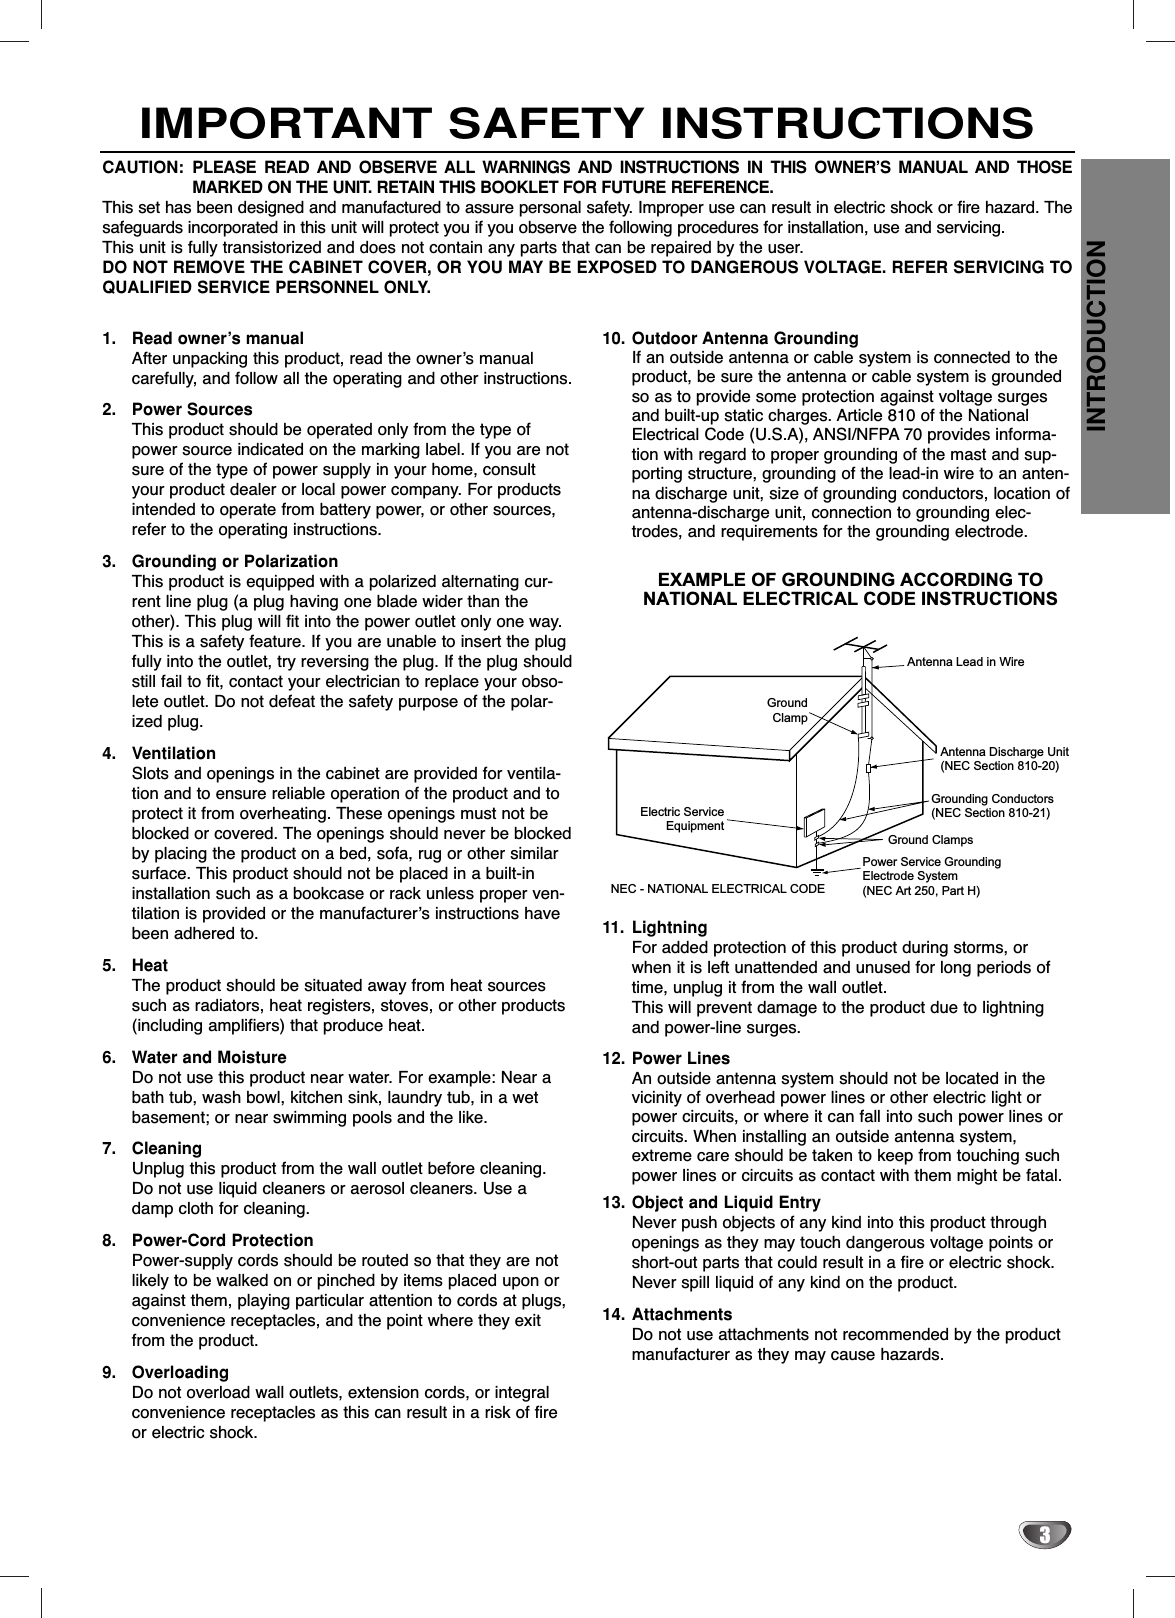 INTRODUCTION3IMPORTANT SAFETY INSTRUCTIONS1. Read owner’s manualAfter unpacking this product, read the owner’s manualcarefully, and follow all the operating and other instructions.2. Power SourcesThis product should be operated only from the type ofpower source indicated on the marking label. If you are notsure of the type of power supply in your home, consultyour product dealer or local power company. For productsintended to operate from battery power, or other sources,refer to the operating instructions.3. Grounding or PolarizationThis product is equipped with a polarized alternating cur-rent line plug (a plug having one blade wider than theother). This plug will fit into the power outlet only one way.This is a safety feature. If you are unable to insert the plugfully into the outlet, try reversing the plug. If the plug shouldstill fail to fit, contact your electrician to replace your obso-lete outlet. Do not defeat the safety purpose of the polar-ized plug.4. VentilationSlots and openings in the cabinet are provided for ventila-tion and to ensure reliable operation of the product and toprotect it from overheating. These openings must not beblocked or covered. The openings should never be blockedby placing the product on a bed, sofa, rug or other similarsurface. This product should not be placed in a built-ininstallation such as a bookcase or rack unless proper ven-tilation is provided or the manufacturer’s instructions havebeen adhered to.5. HeatThe product should be situated away from heat sourcessuch as radiators, heat registers, stoves, or other products(including amplifiers) that produce heat.6. Water and MoistureDo not use this product near water. For example: Near abath tub, wash bowl, kitchen sink, laundry tub, in a wetbasement; or near swimming pools and the like.7. CleaningUnplug this product from the wall outlet before cleaning.Do not use liquid cleaners or aerosol cleaners. Use adamp cloth for cleaning.8. Power-Cord ProtectionPower-supply cords should be routed so that they are notlikely to be walked on or pinched by items placed upon oragainst them, playing particular attention to cords at plugs,convenience receptacles, and the point where they exitfrom the product.9. OverloadingDo not overload wall outlets, extension cords, or integralconvenience receptacles as this can result in a risk of fireor electric shock.10. Outdoor Antenna Grounding If an outside antenna or cable system is connected to theproduct, be sure the antenna or cable system is groundedso as to provide some protection against voltage surgesand built-up static charges. Article 810 of the NationalElectrical Code (U.S.A), ANSI/NFPA 70 provides informa-tion with regard to proper grounding of the mast and sup-porting structure, grounding of the lead-in wire to an anten-na discharge unit, size of grounding conductors, location ofantenna-discharge unit, connection to grounding elec-trodes, and requirements for the grounding electrode.11. LightningFor added protection of this product during storms, orwhen it is left unattended and unused for long periods oftime, unplug it from the wall outlet.This will prevent damage to the product due to lightningand power-line surges.12. Power Lines An outside antenna system should not be located in thevicinity of overhead power lines or other electric light orpower circuits, or where it can fall into such power lines orcircuits. When installing an outside antenna system,extreme care should be taken to keep from touching suchpower lines or circuits as contact with them might be fatal.13. Object and Liquid EntryNever push objects of any kind into this product throughopenings as they may touch dangerous voltage points orshort-out parts that could result in a fire or electric shock.Never spill liquid of any kind on the product.14. AttachmentsDo not use attachments not recommended by the productmanufacturer as they may cause hazards.Antenna Lead in WireAntenna Discharge Unit(NEC Section 810-20) Grounding Conductors(NEC Section 810-21)Ground ClampsPower Service Grounding Electrode System (NEC Art 250, Part H)GroundClampElectric ServiceEquipmentNEC - NATIONAL ELECTRICAL CODEEXAMPLE OF GROUNDING ACCORDING TONATIONAL ELECTRICAL CODE INSTRUCTIONSCAUTION: PLEASE READ AND OBSERVE ALL WARNINGS AND INSTRUCTIONS IN THIS OWNER’S MANUAL AND THOSEMARKED ON THE UNIT. RETAIN THIS BOOKLET FOR FUTURE REFERENCE.This set has been designed and manufactured to assure personal safety. Improper use can result in electric shock or fire hazard. Thesafeguards incorporated in this unit will protect you if you observe the following procedures for installation, use and servicing.This unit is fully transistorized and does not contain any parts that can be repaired by the user.DO NOT REMOVE THE CABINET COVER, OR YOU MAY BE EXPOSED TO DANGEROUS VOLTAGE. REFER SERVICING TOQUALIFIED SERVICE PERSONNEL ONLY.